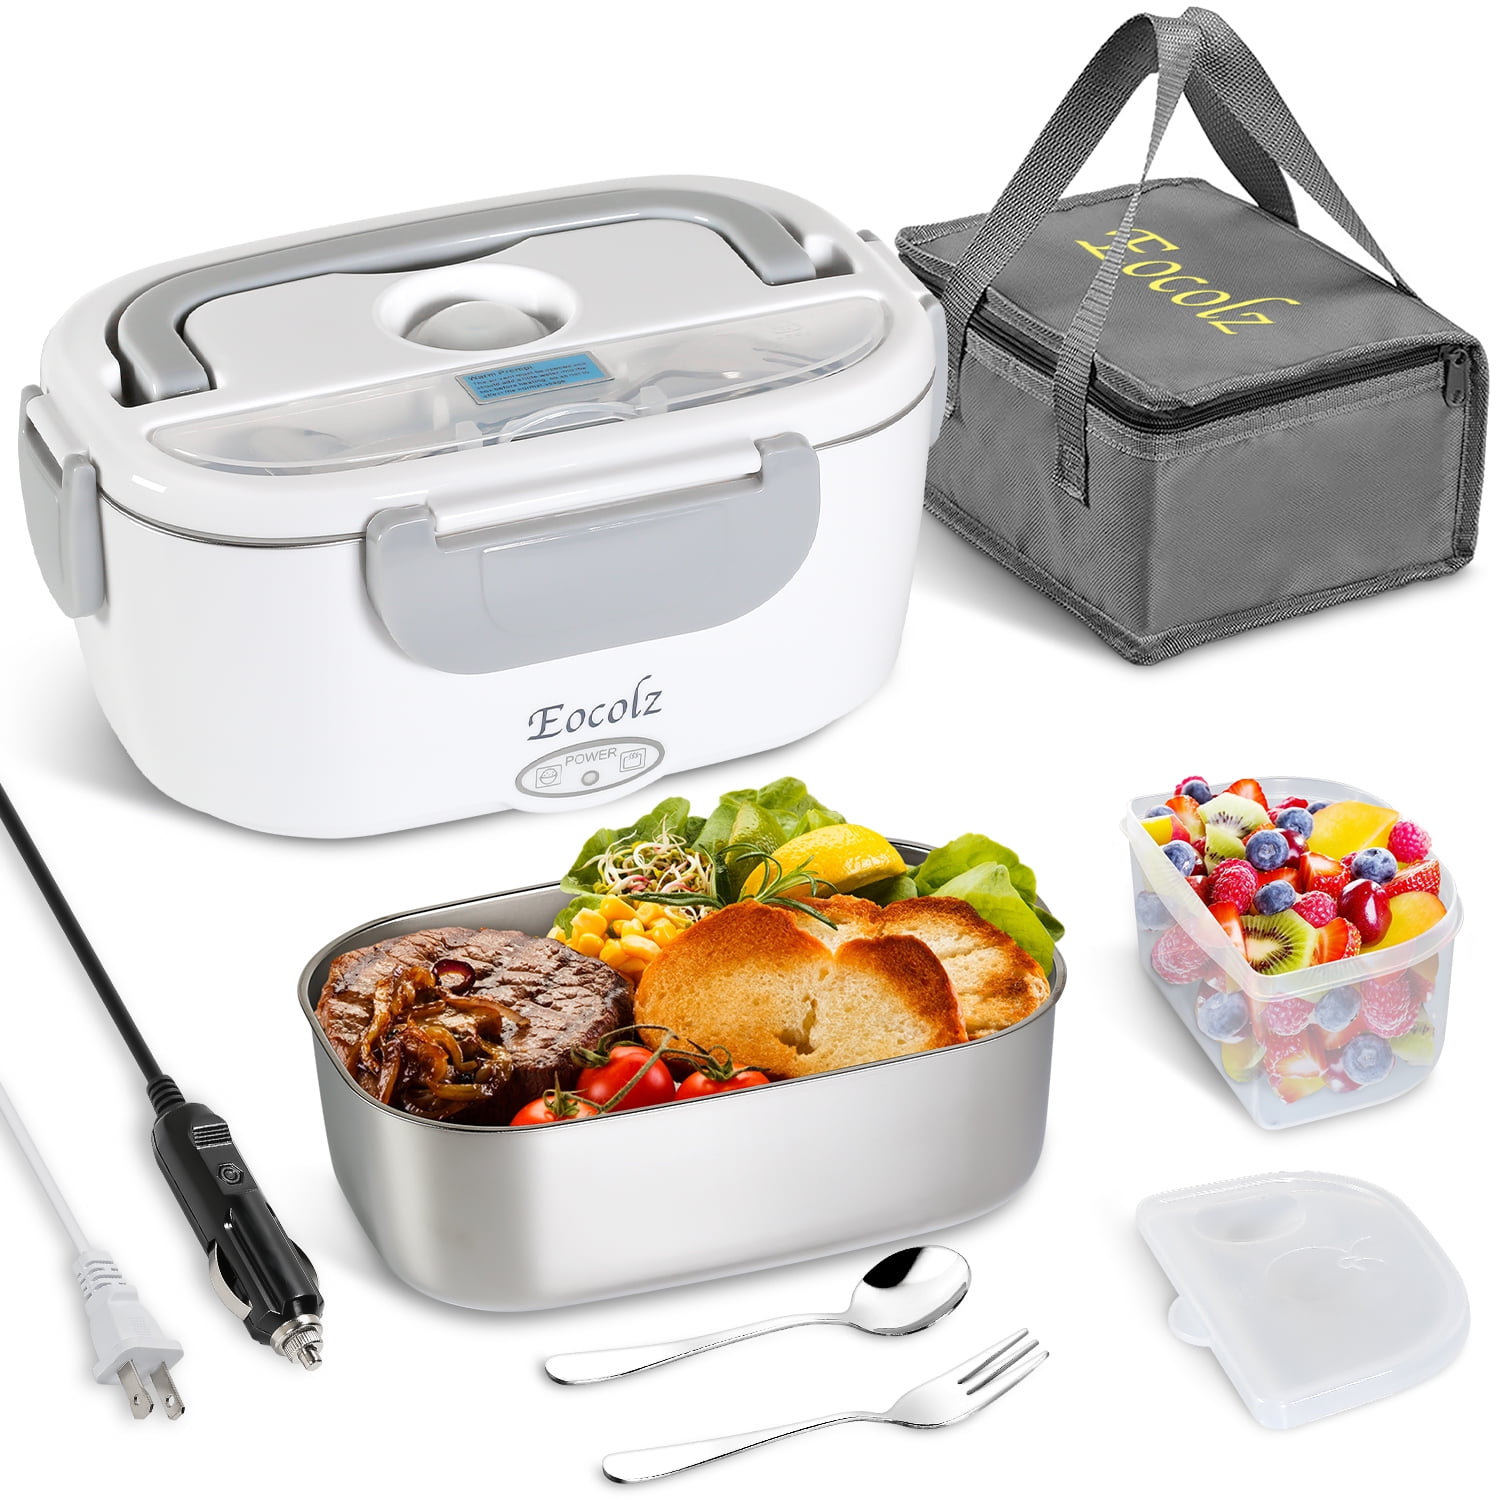 Electric Lunch Box 60W Food Heater Warmer, Eocolz 2 in 1 Portable Lunch Box  for Car Truck Home Work Leak Proof with 1.5L Removable 304 Stainless Steel  Container & Spoon 2 Compartments